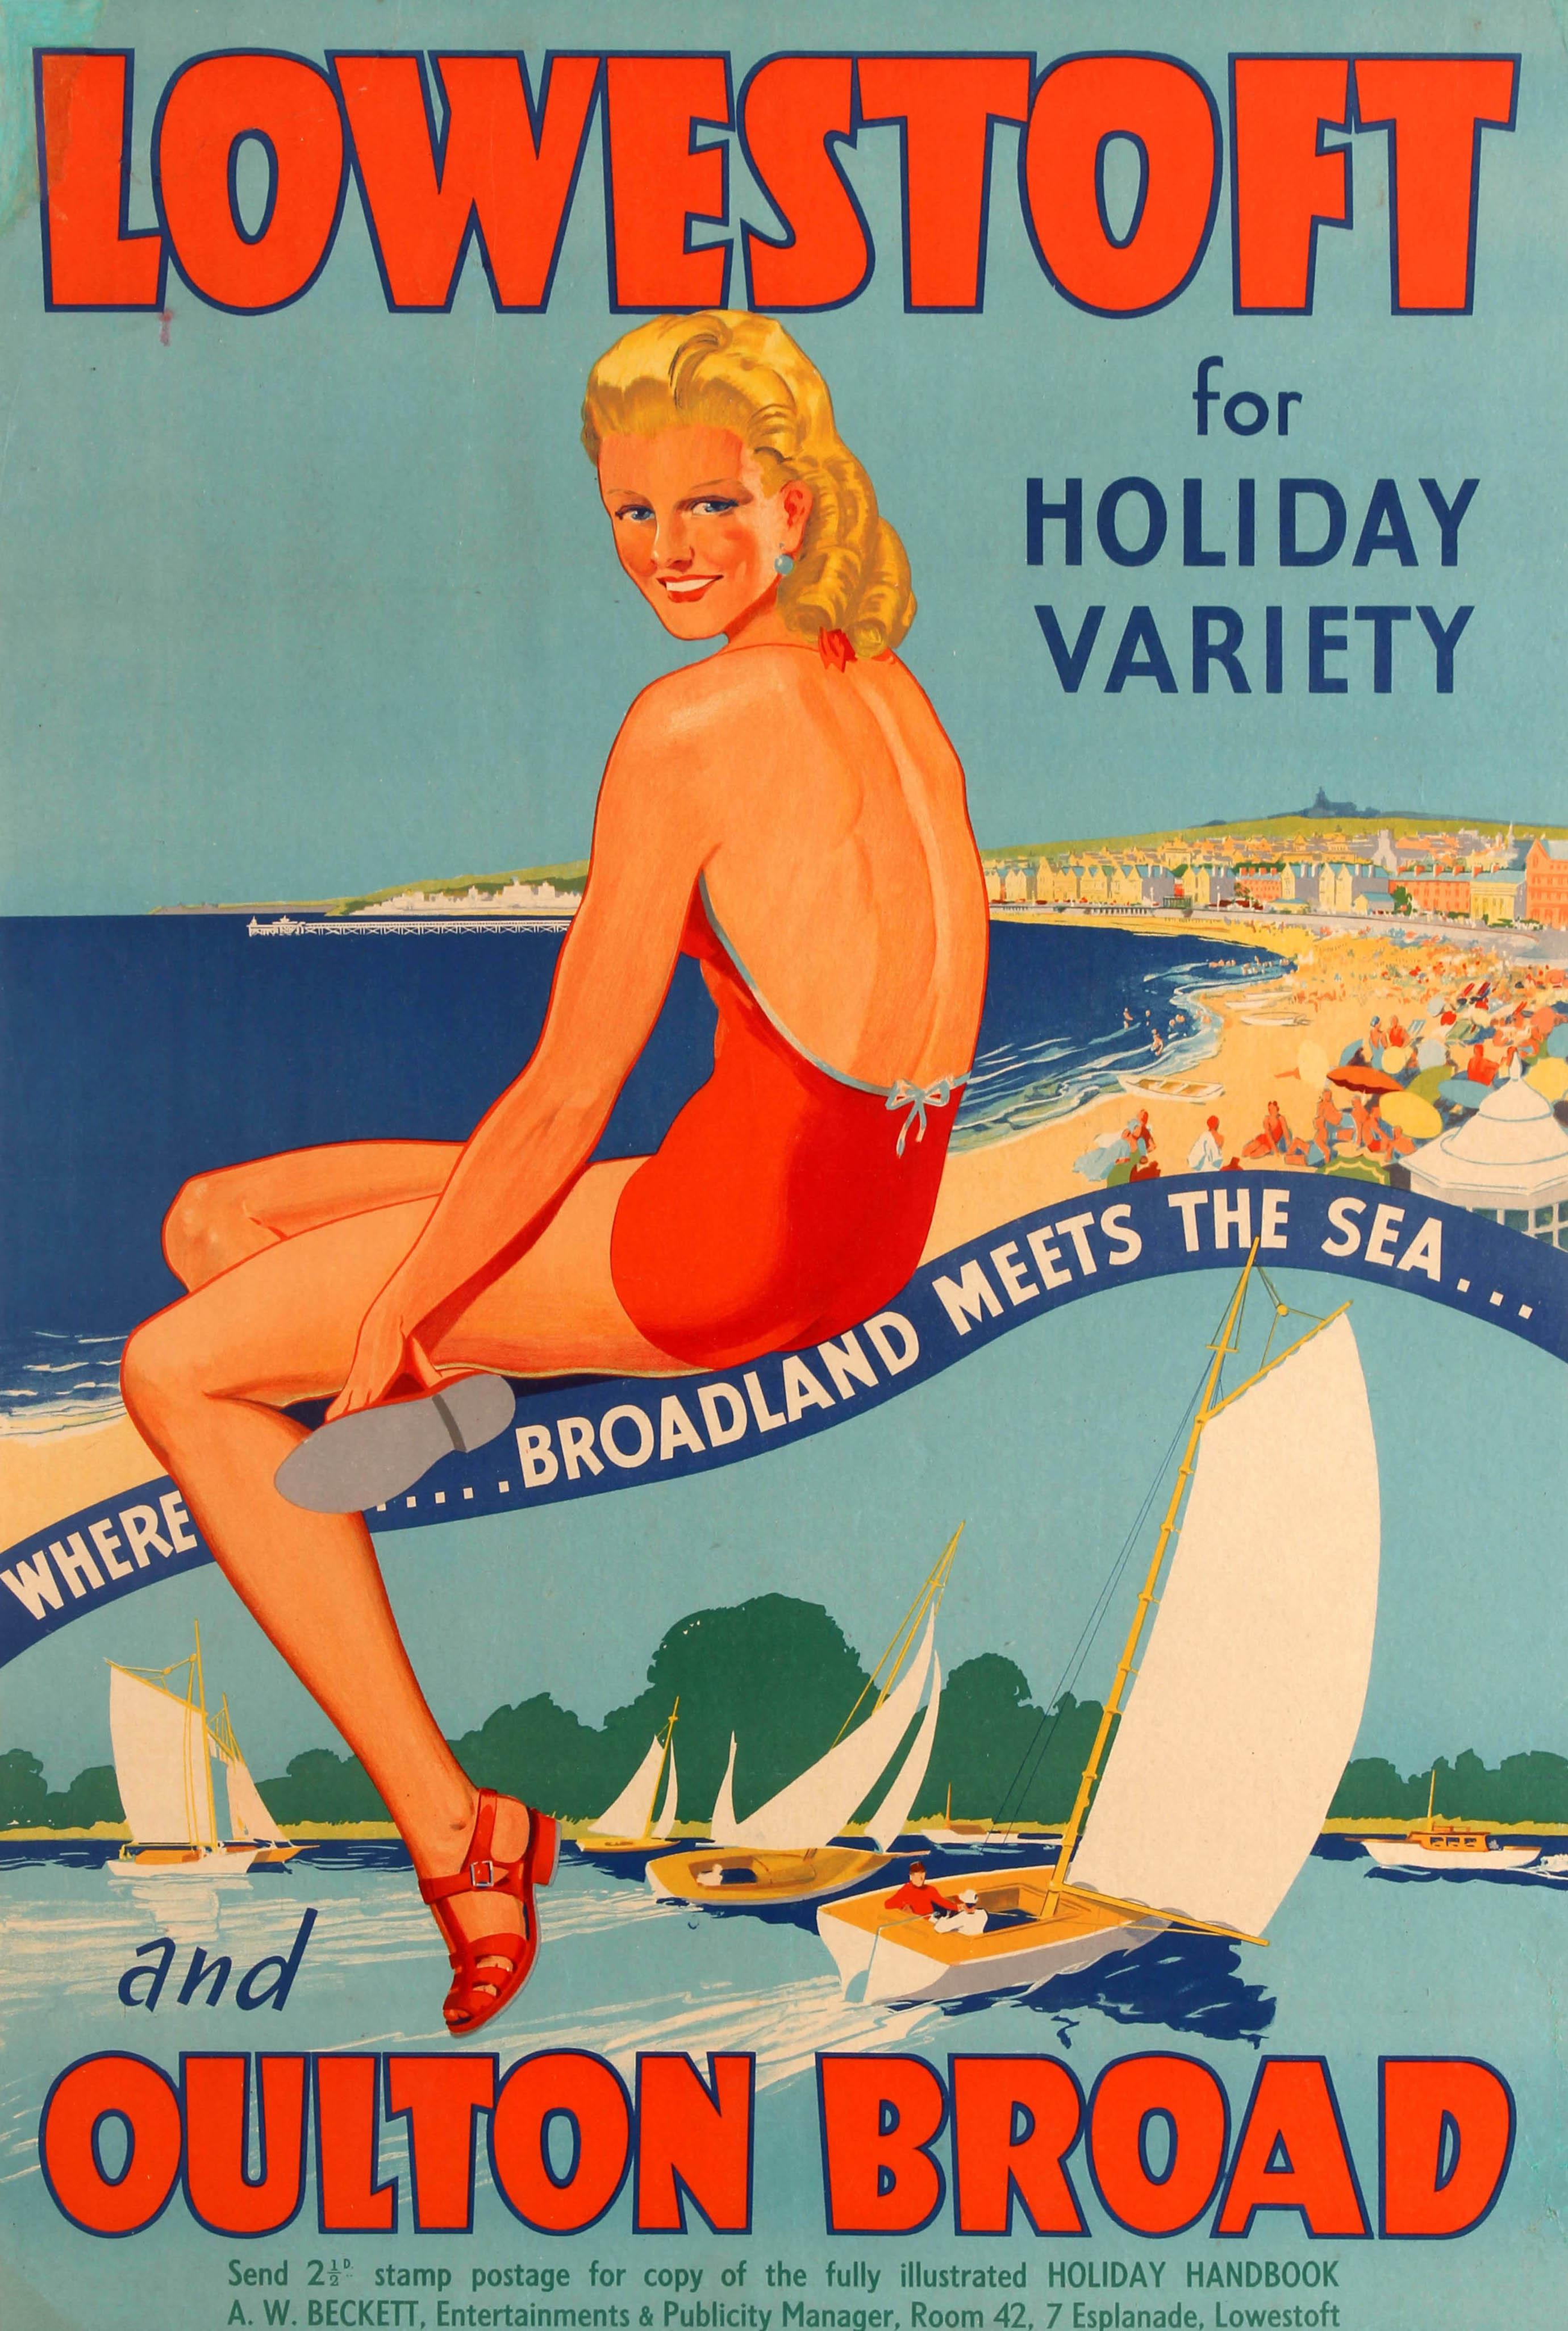 Original vintage travel advertising poster promoting the historic seaside town of Lowestoft in Suffolk and lakes at nearby Oulton Broad - Lowestoft and Oulton Broad for Holiday Variety where ... Broadland meets the sea ... Colourful artwork